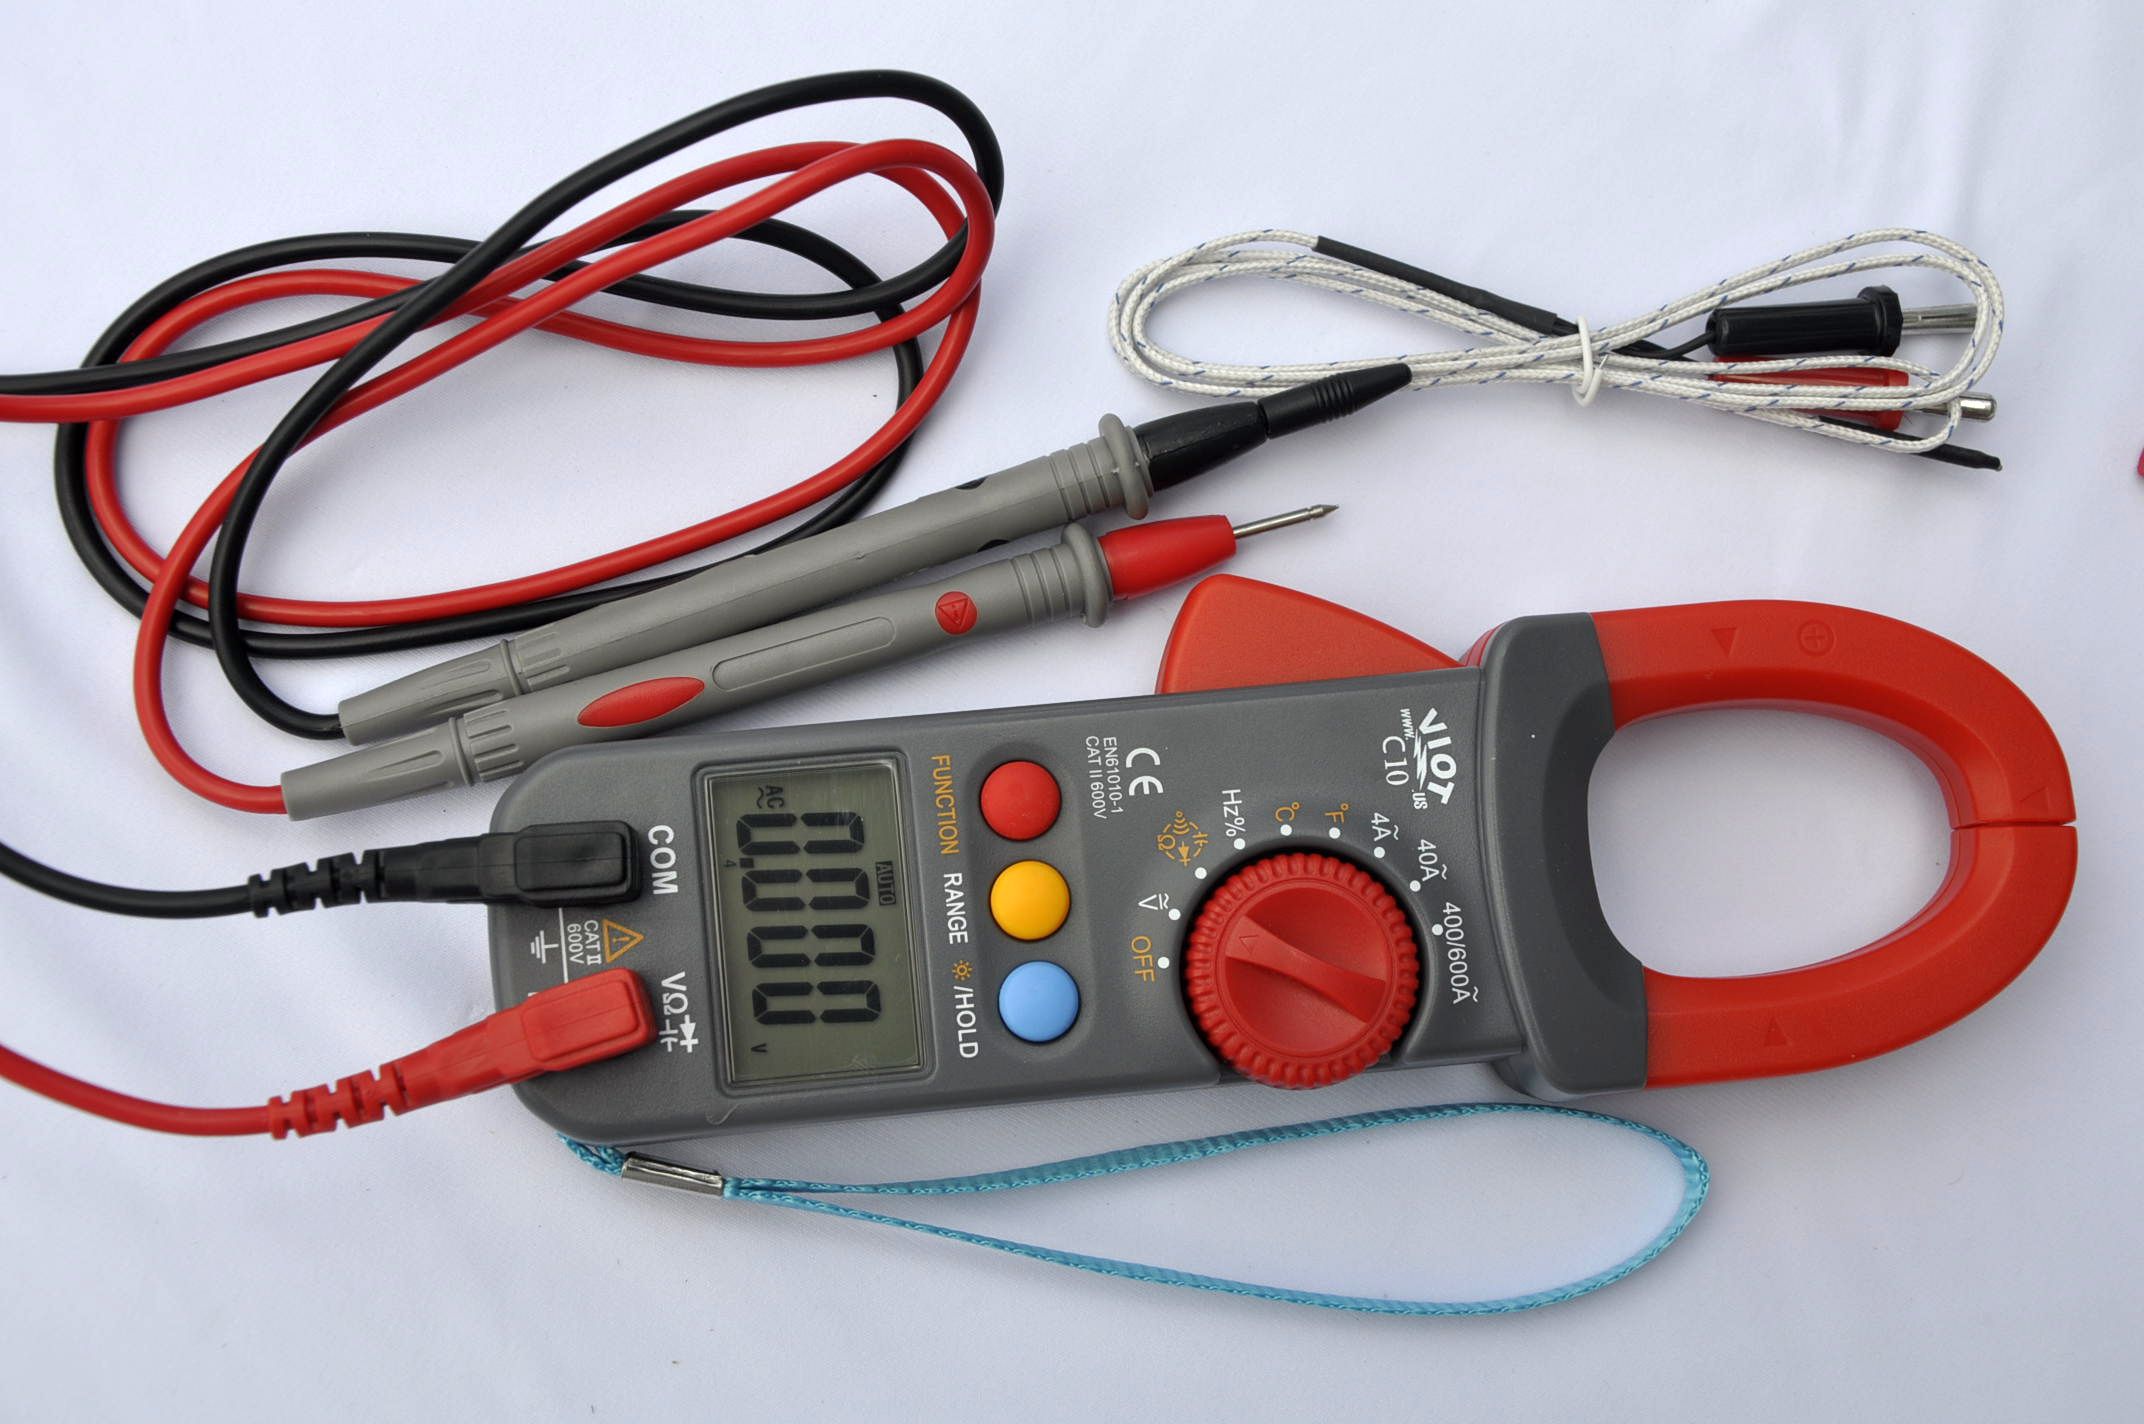 Clamp Meter Ammeter Ohm Volt Multimeter DMM+Capacitor Tester+Type K Thermocouple